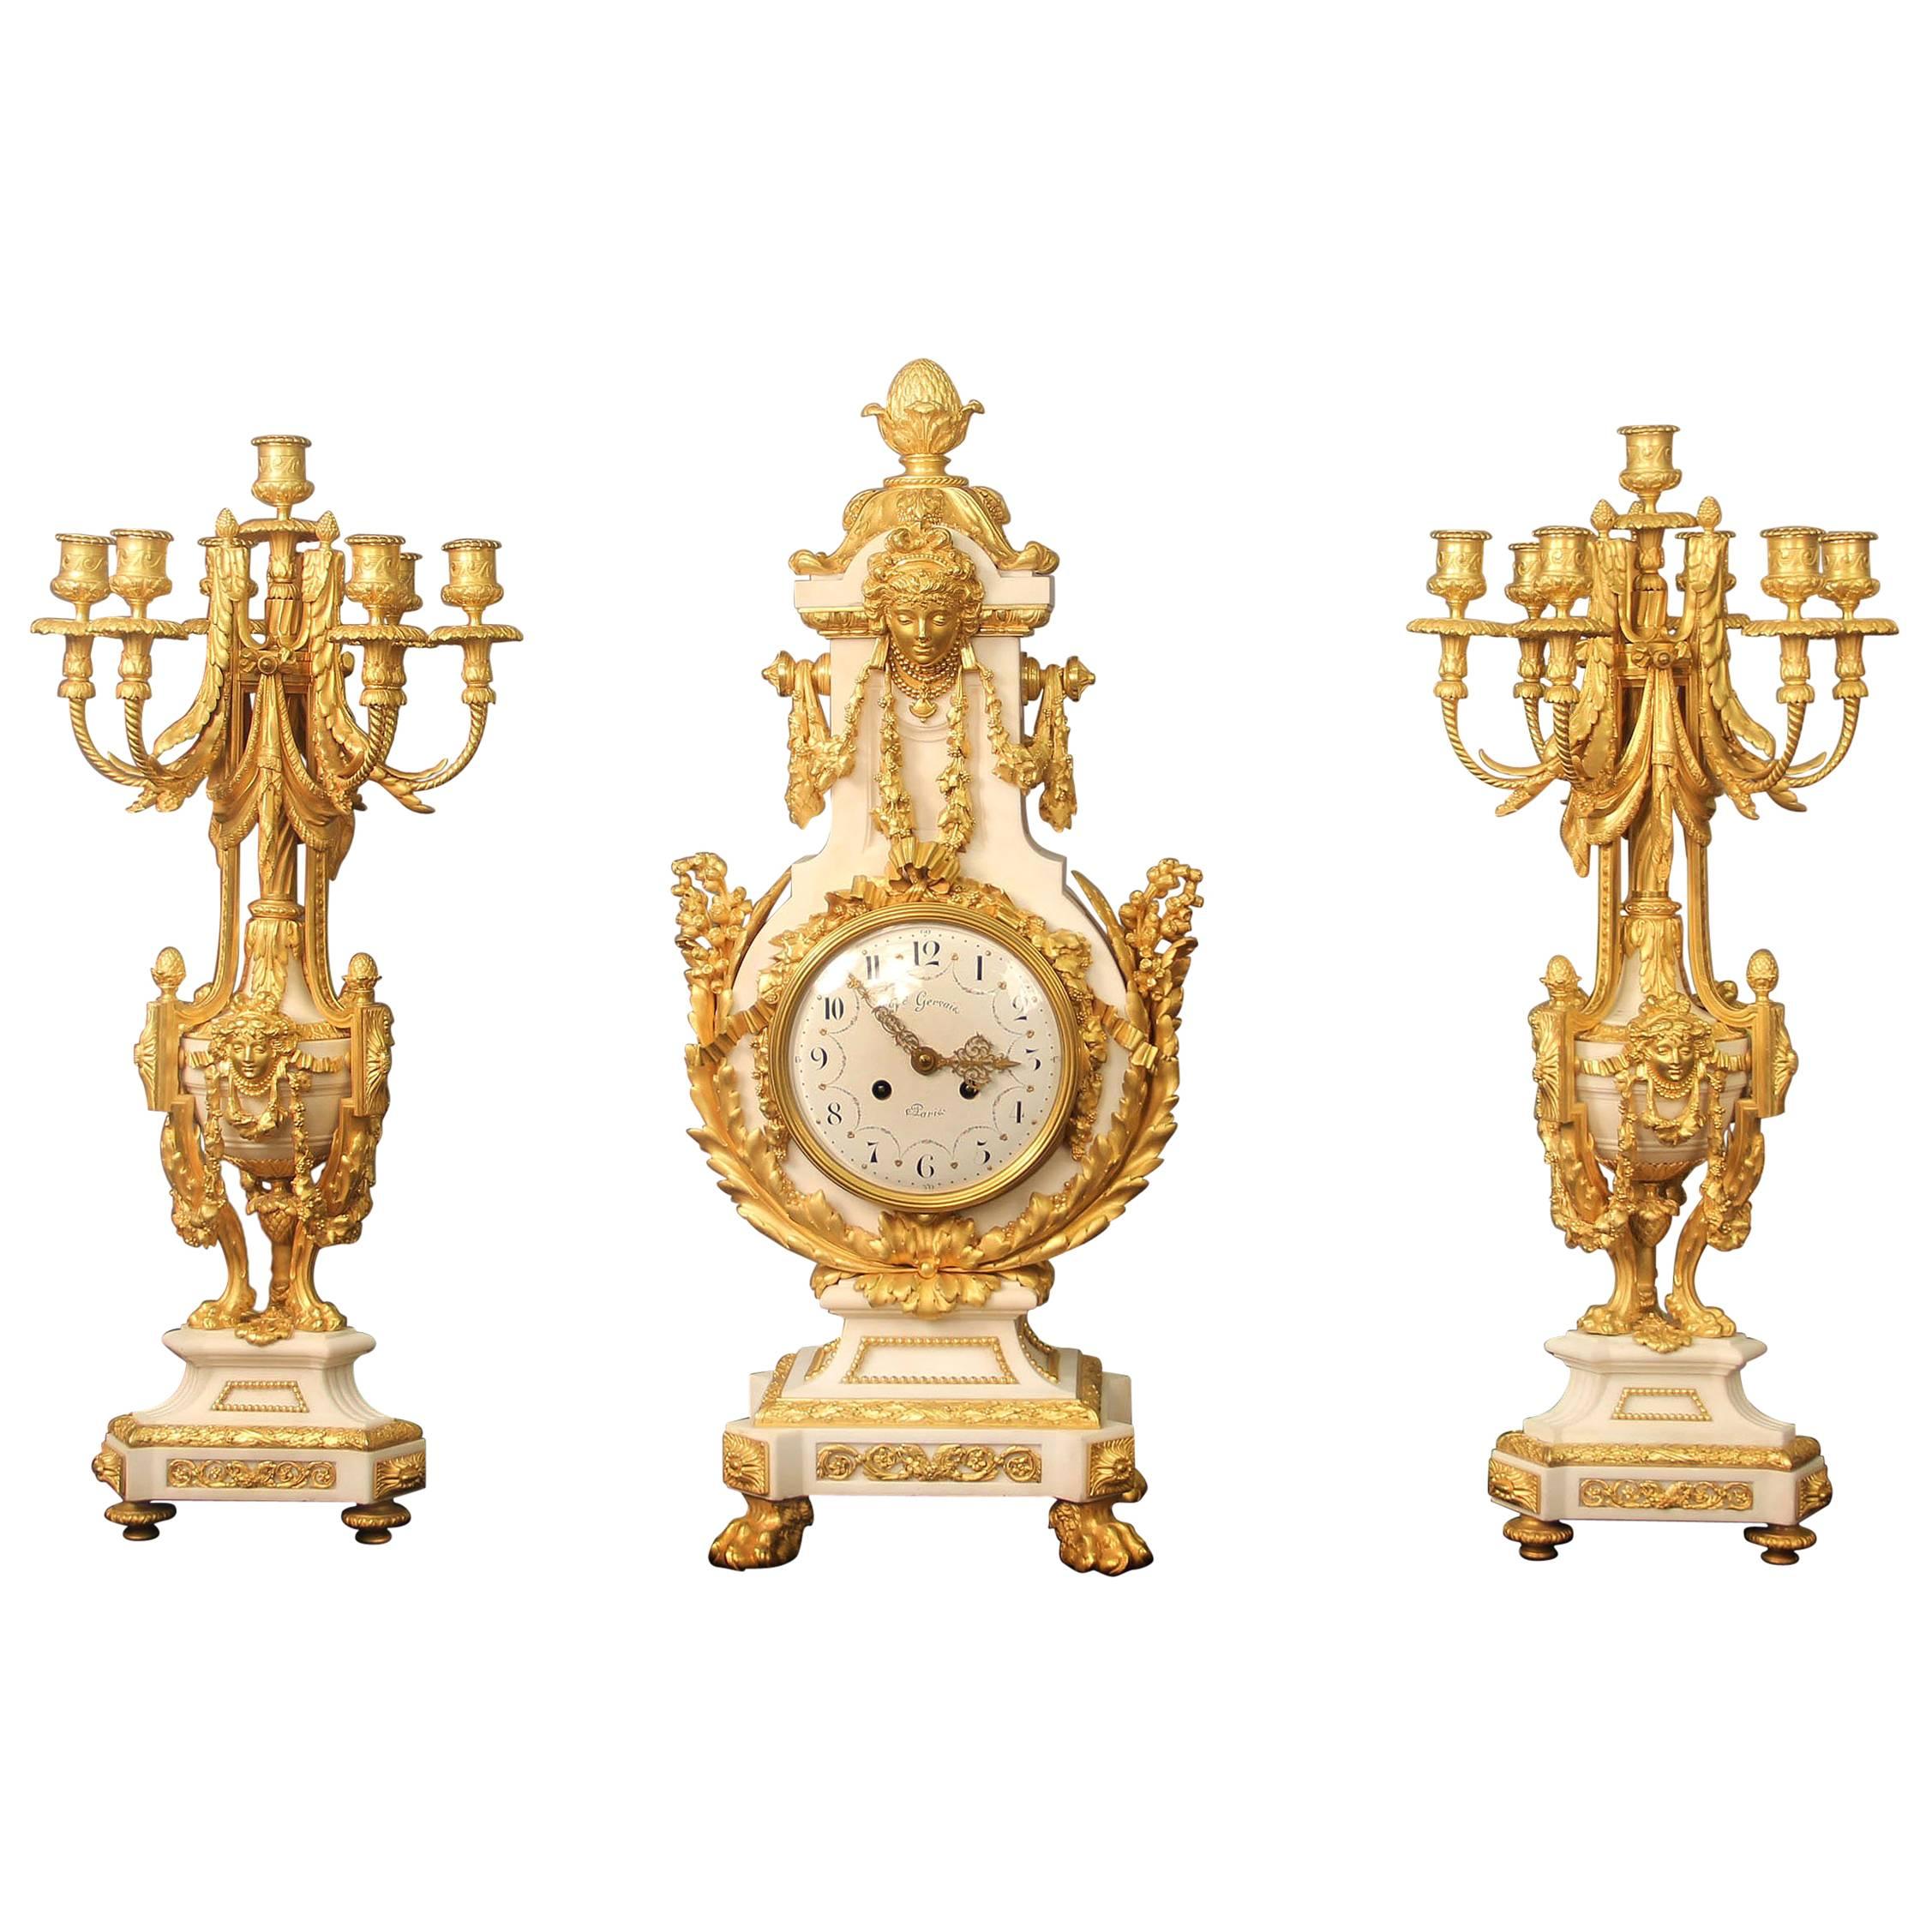 Exceptional Late 19th Century Three-Piece Clock Set by Ferdinand Gervais